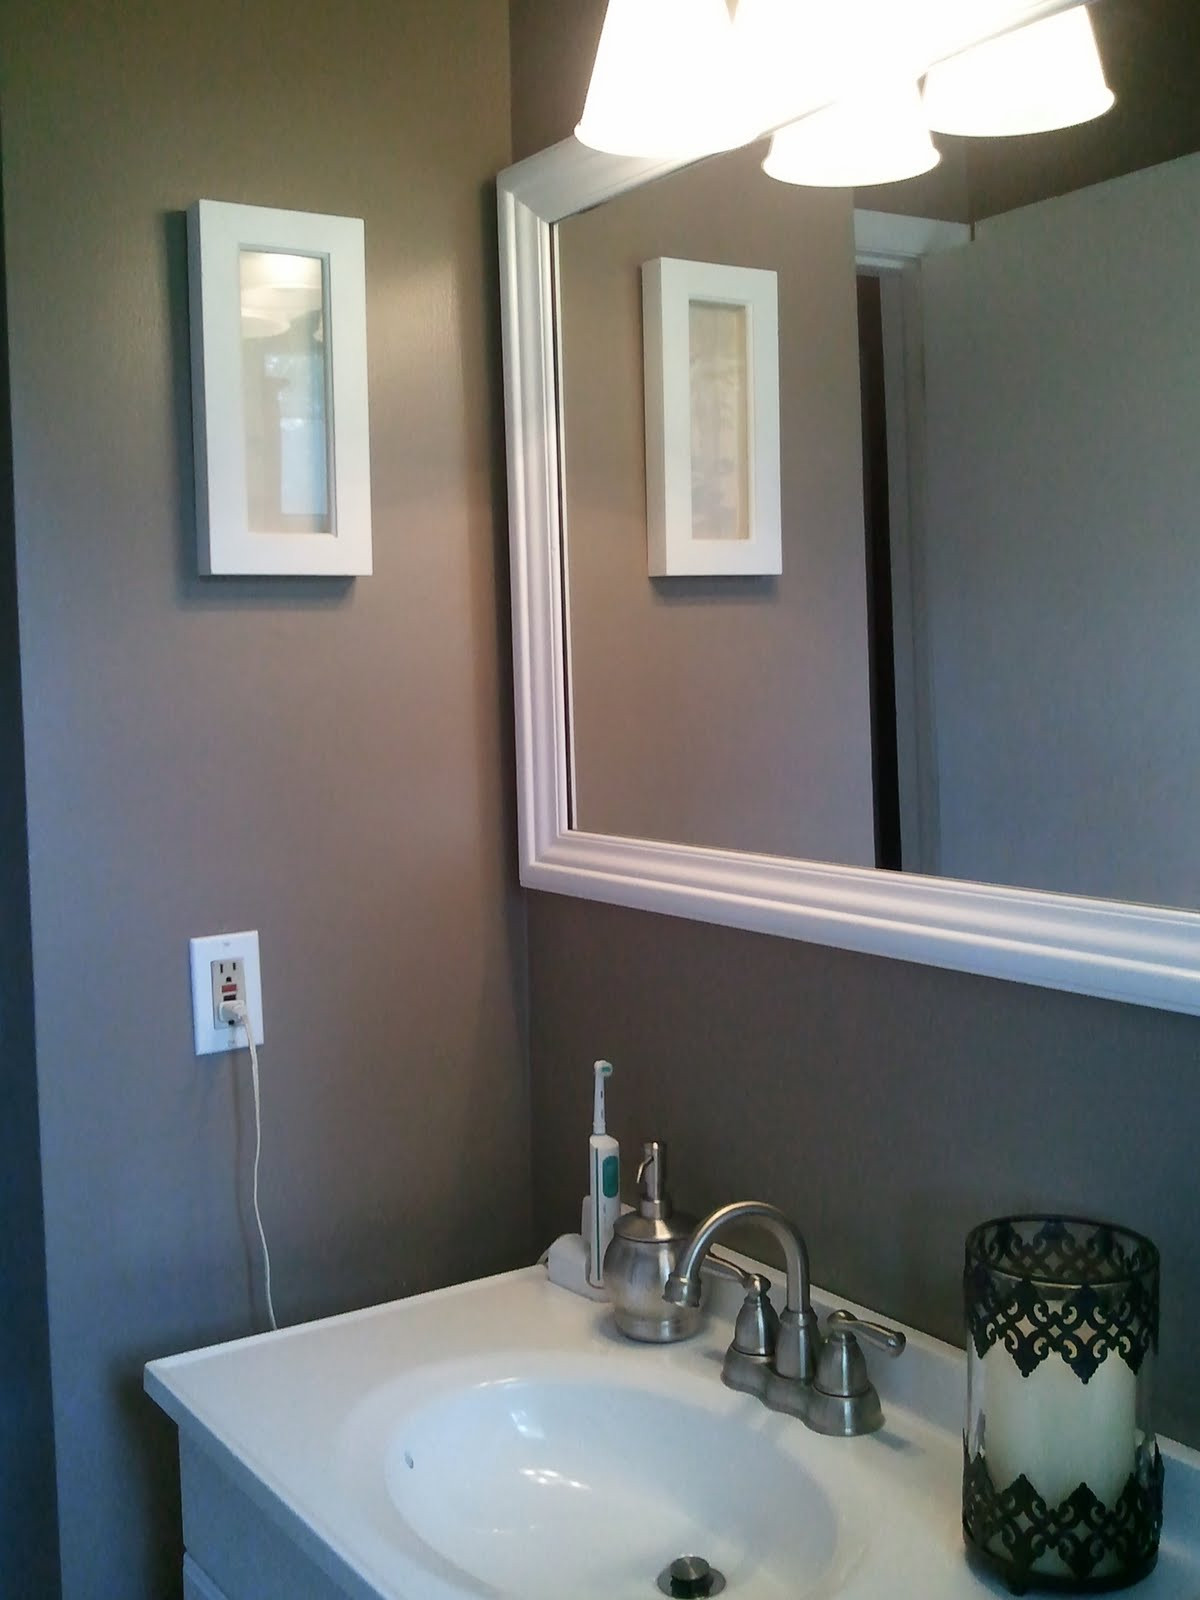 Paint Colors For Small Bathrooms
 Bathroom Paint Colors For Small Bathrooms New Suggested